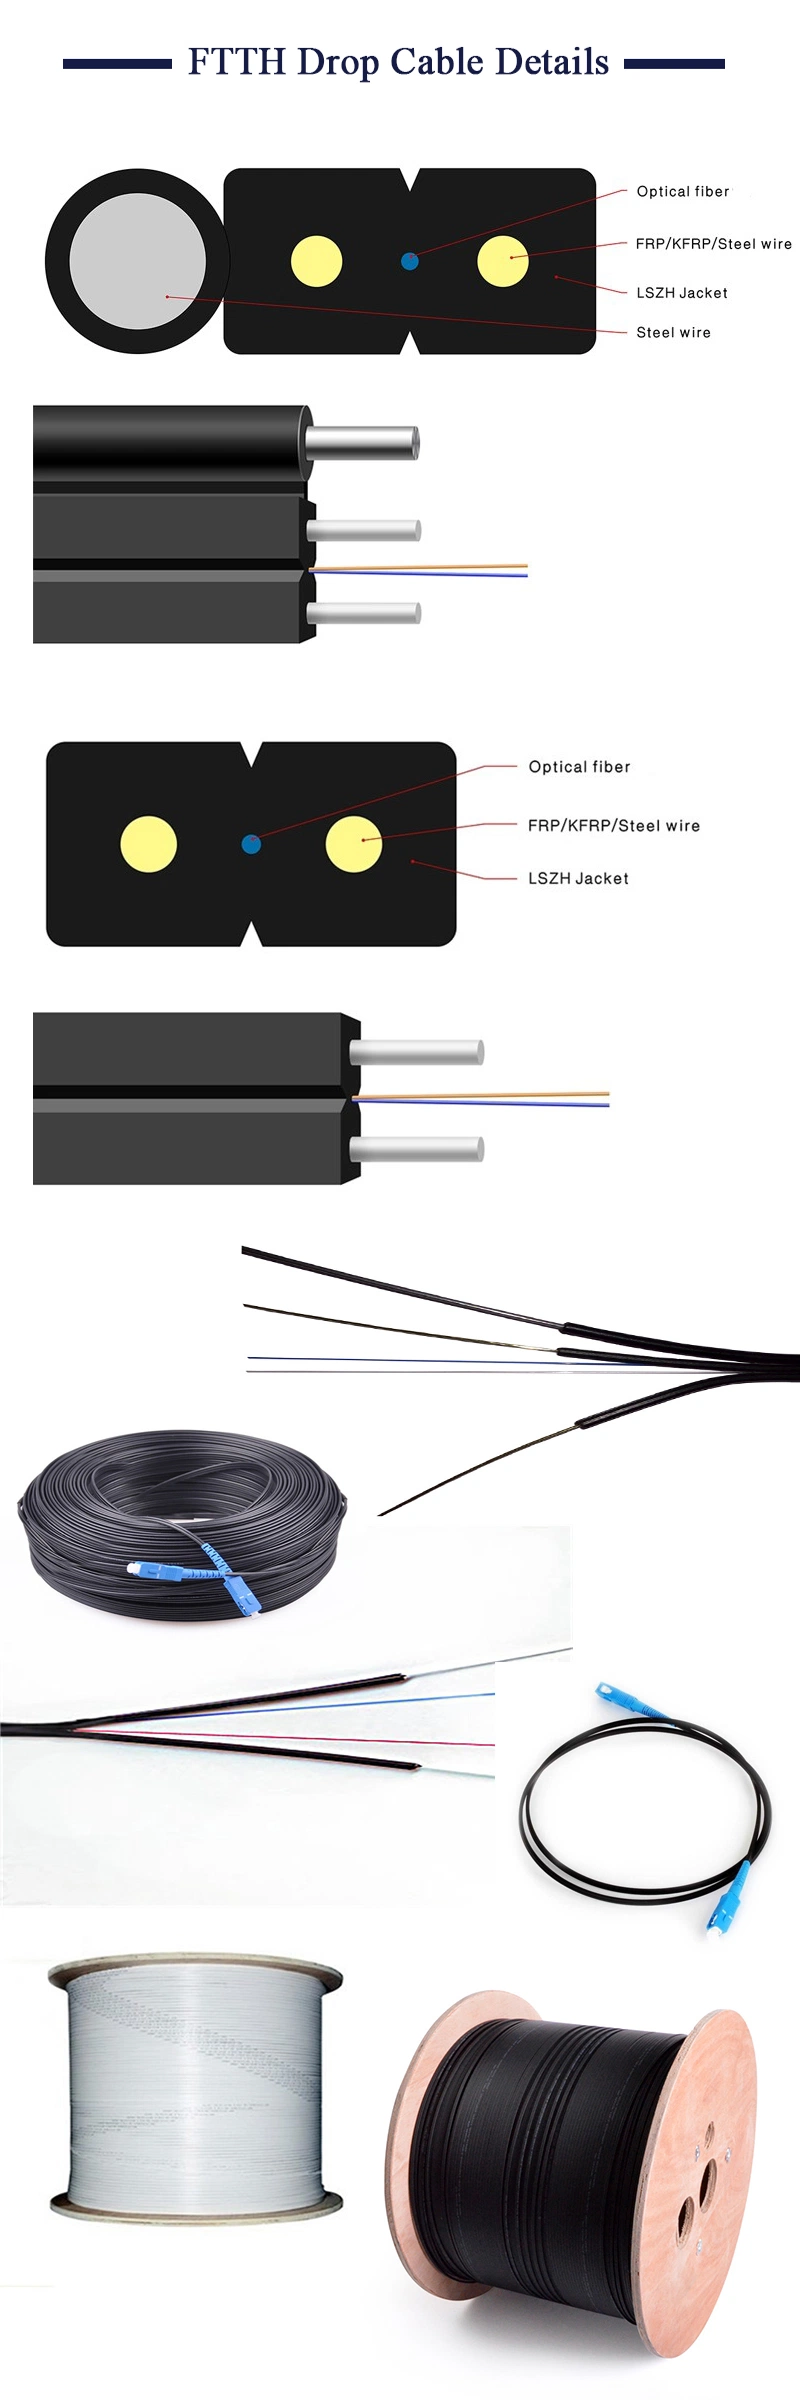 GJYXFCH 2 Core Single-Mode Self-Supporting FTTH Bow-Type Drop Fiber Optic Cable